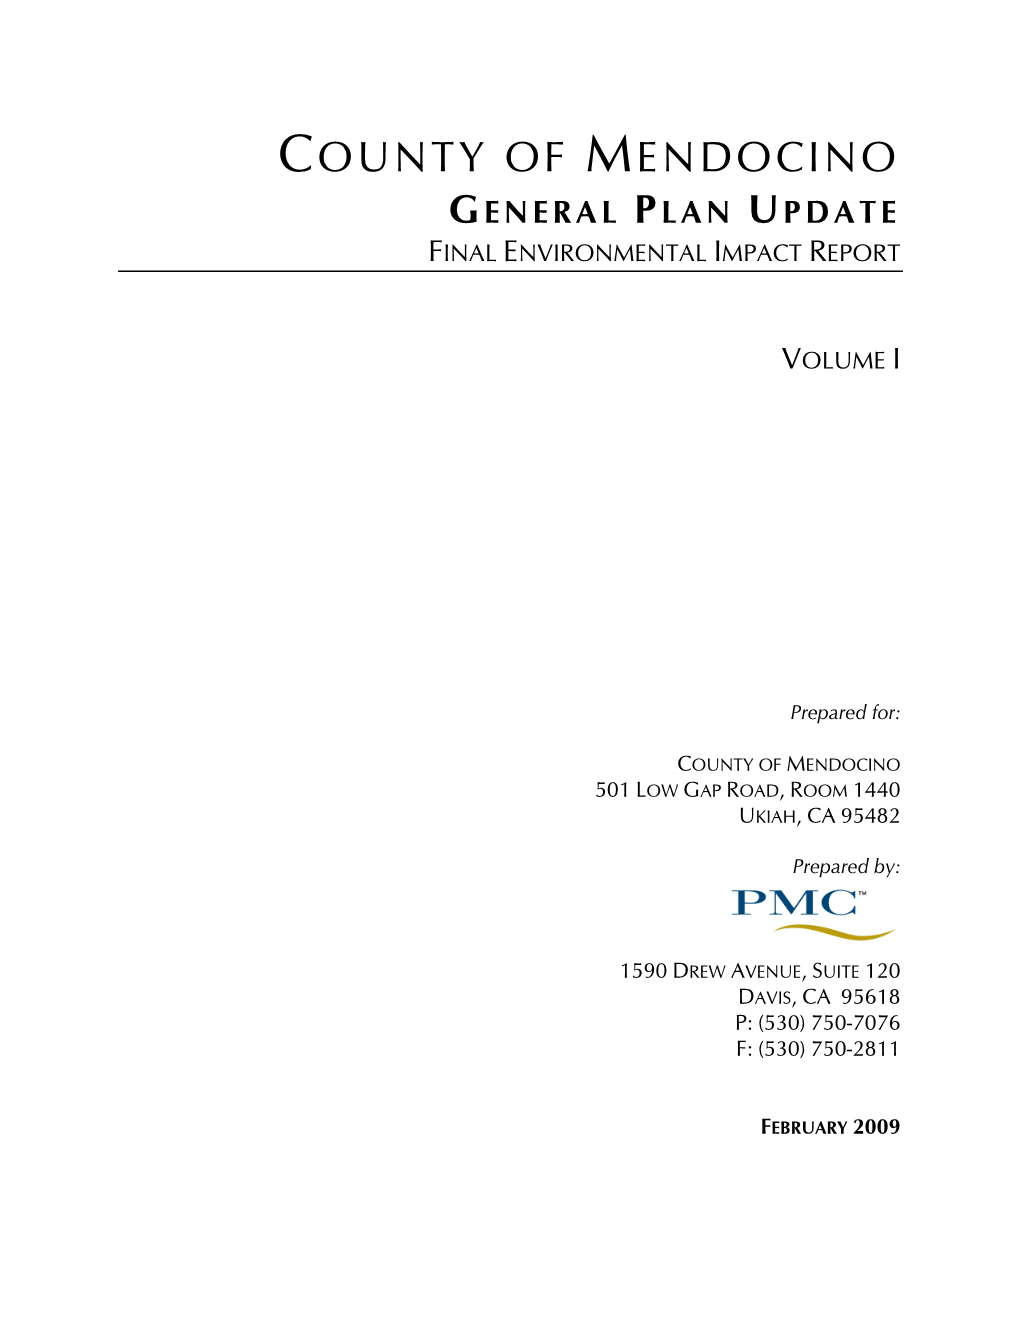 General Plan Update February 2009 Final Environmental Impact Report I 1.0 INTRODUCTION 1.0 INTRODUCTION